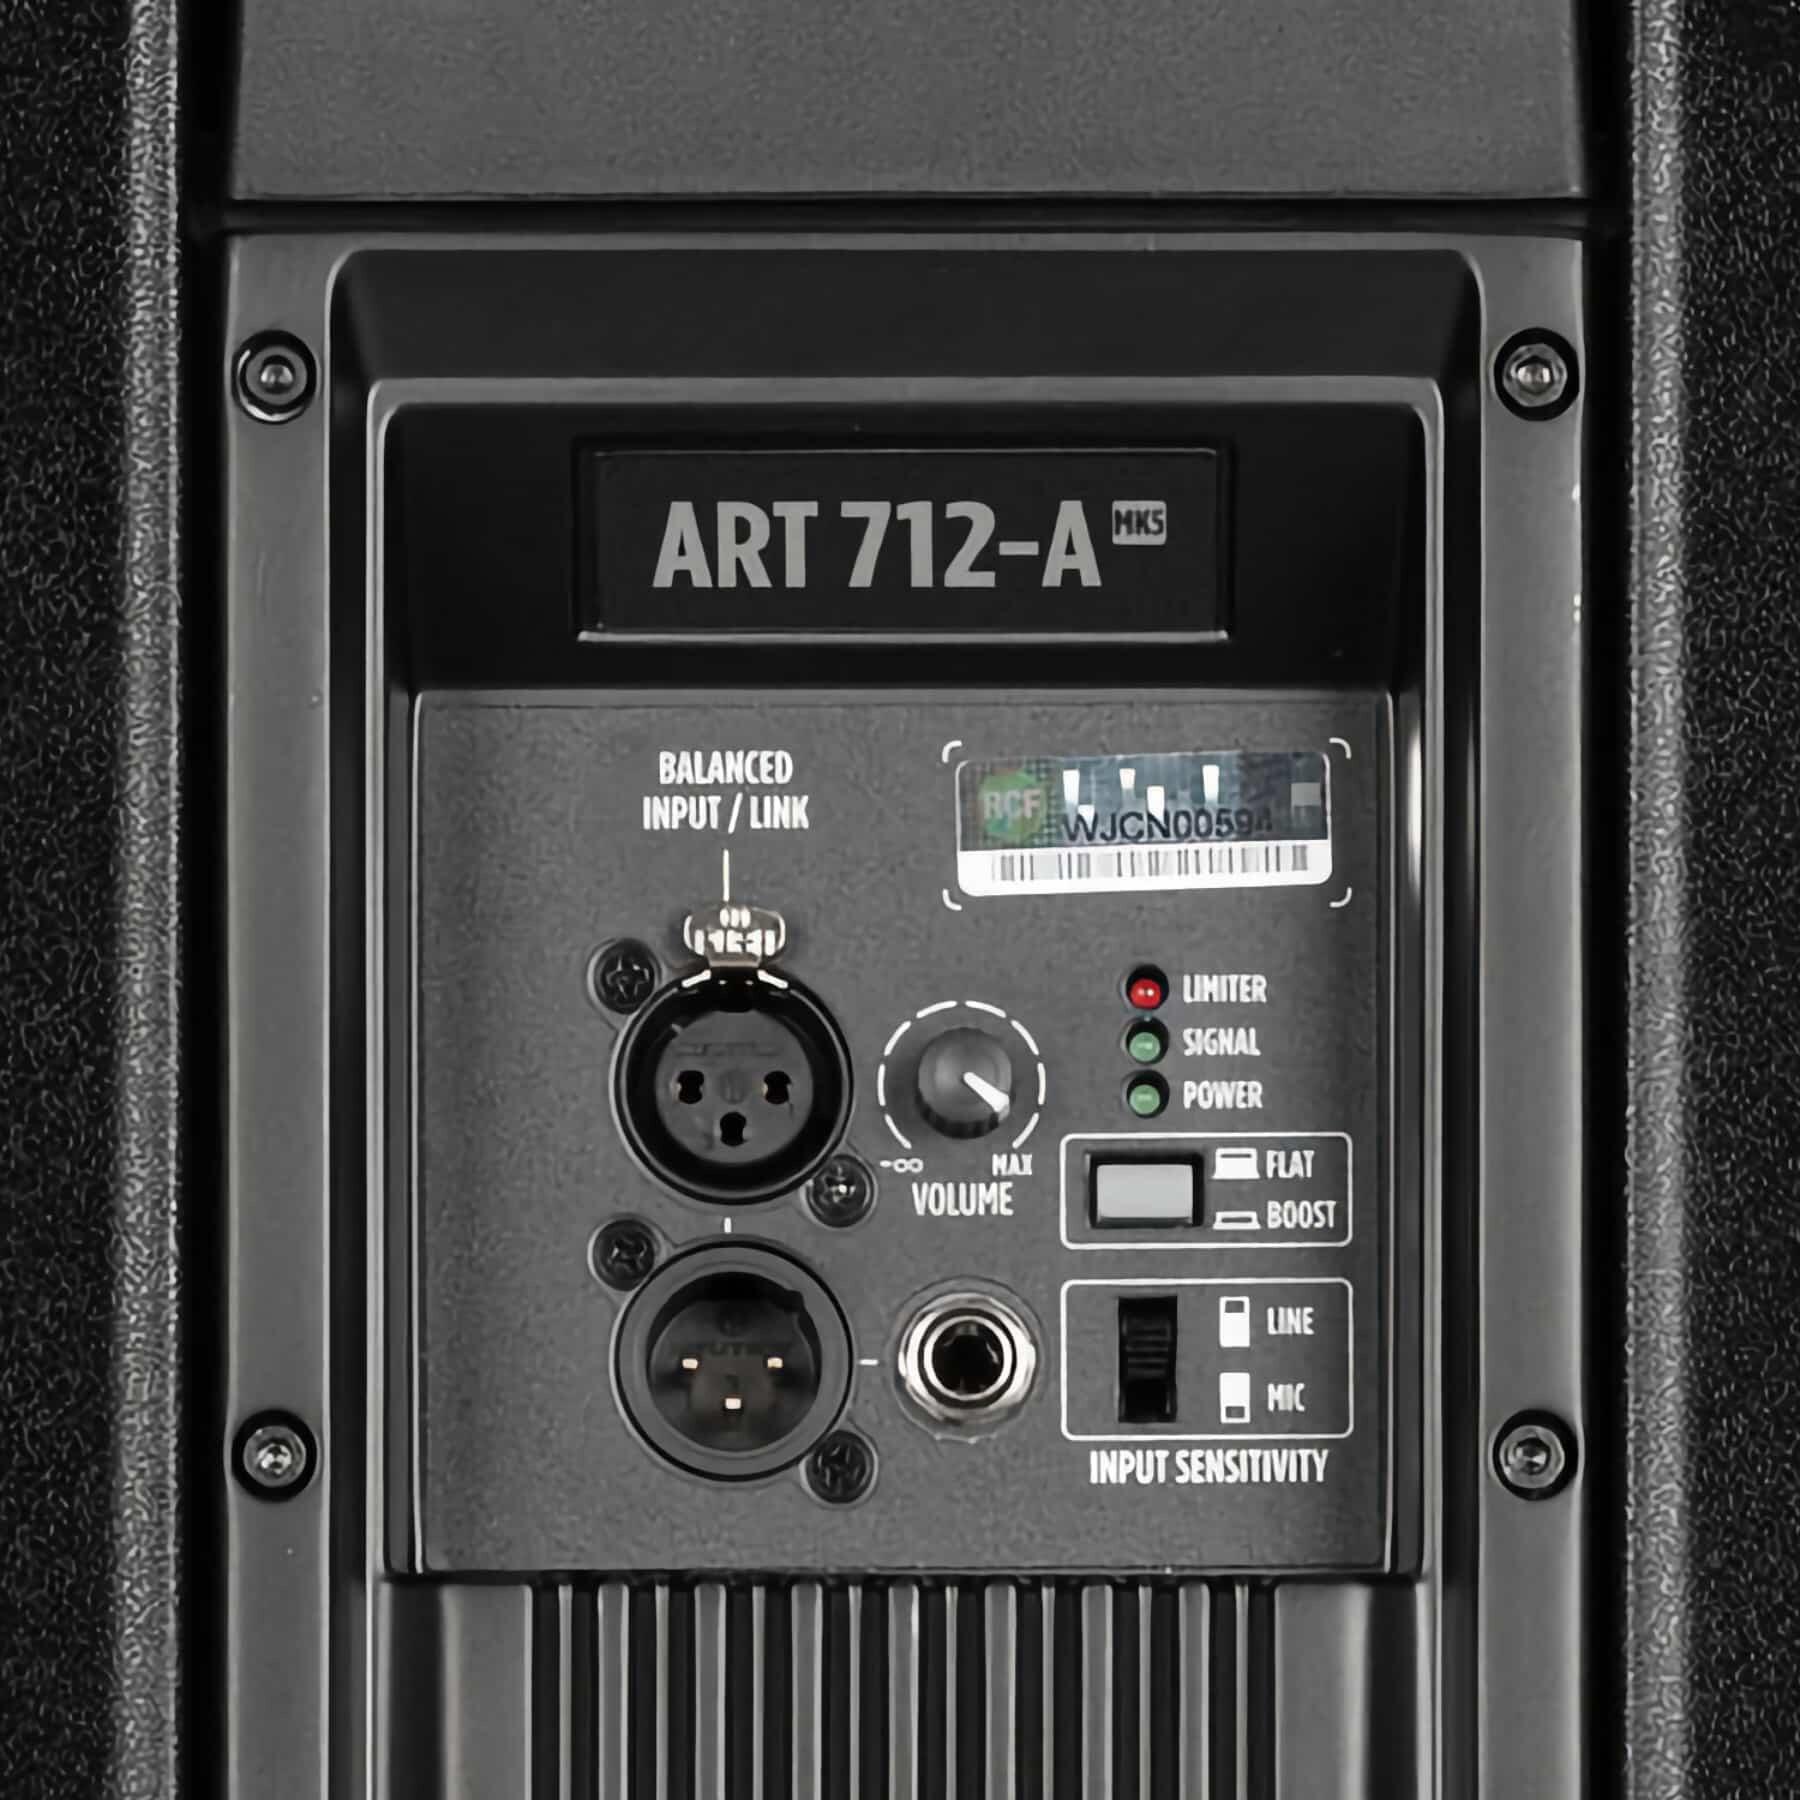 RCF ART 712-A MK5 Active Two-Way Speaker controls